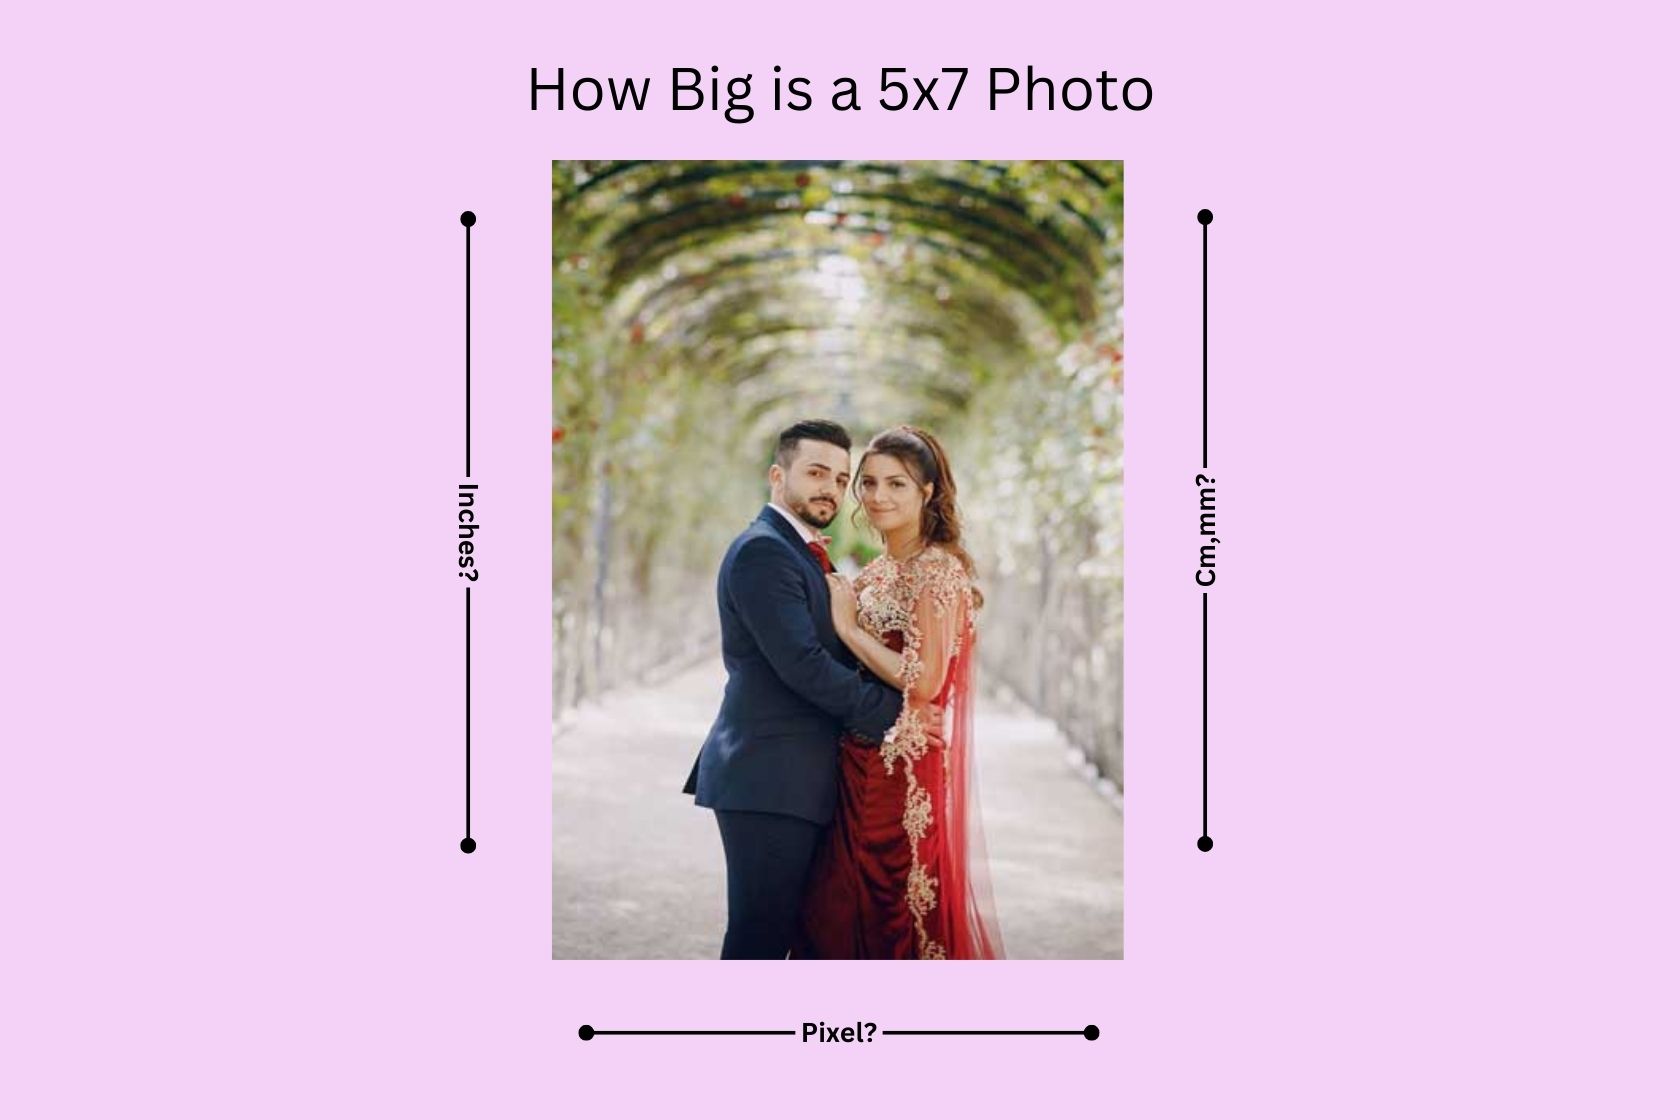 how big is a 5x7 photo